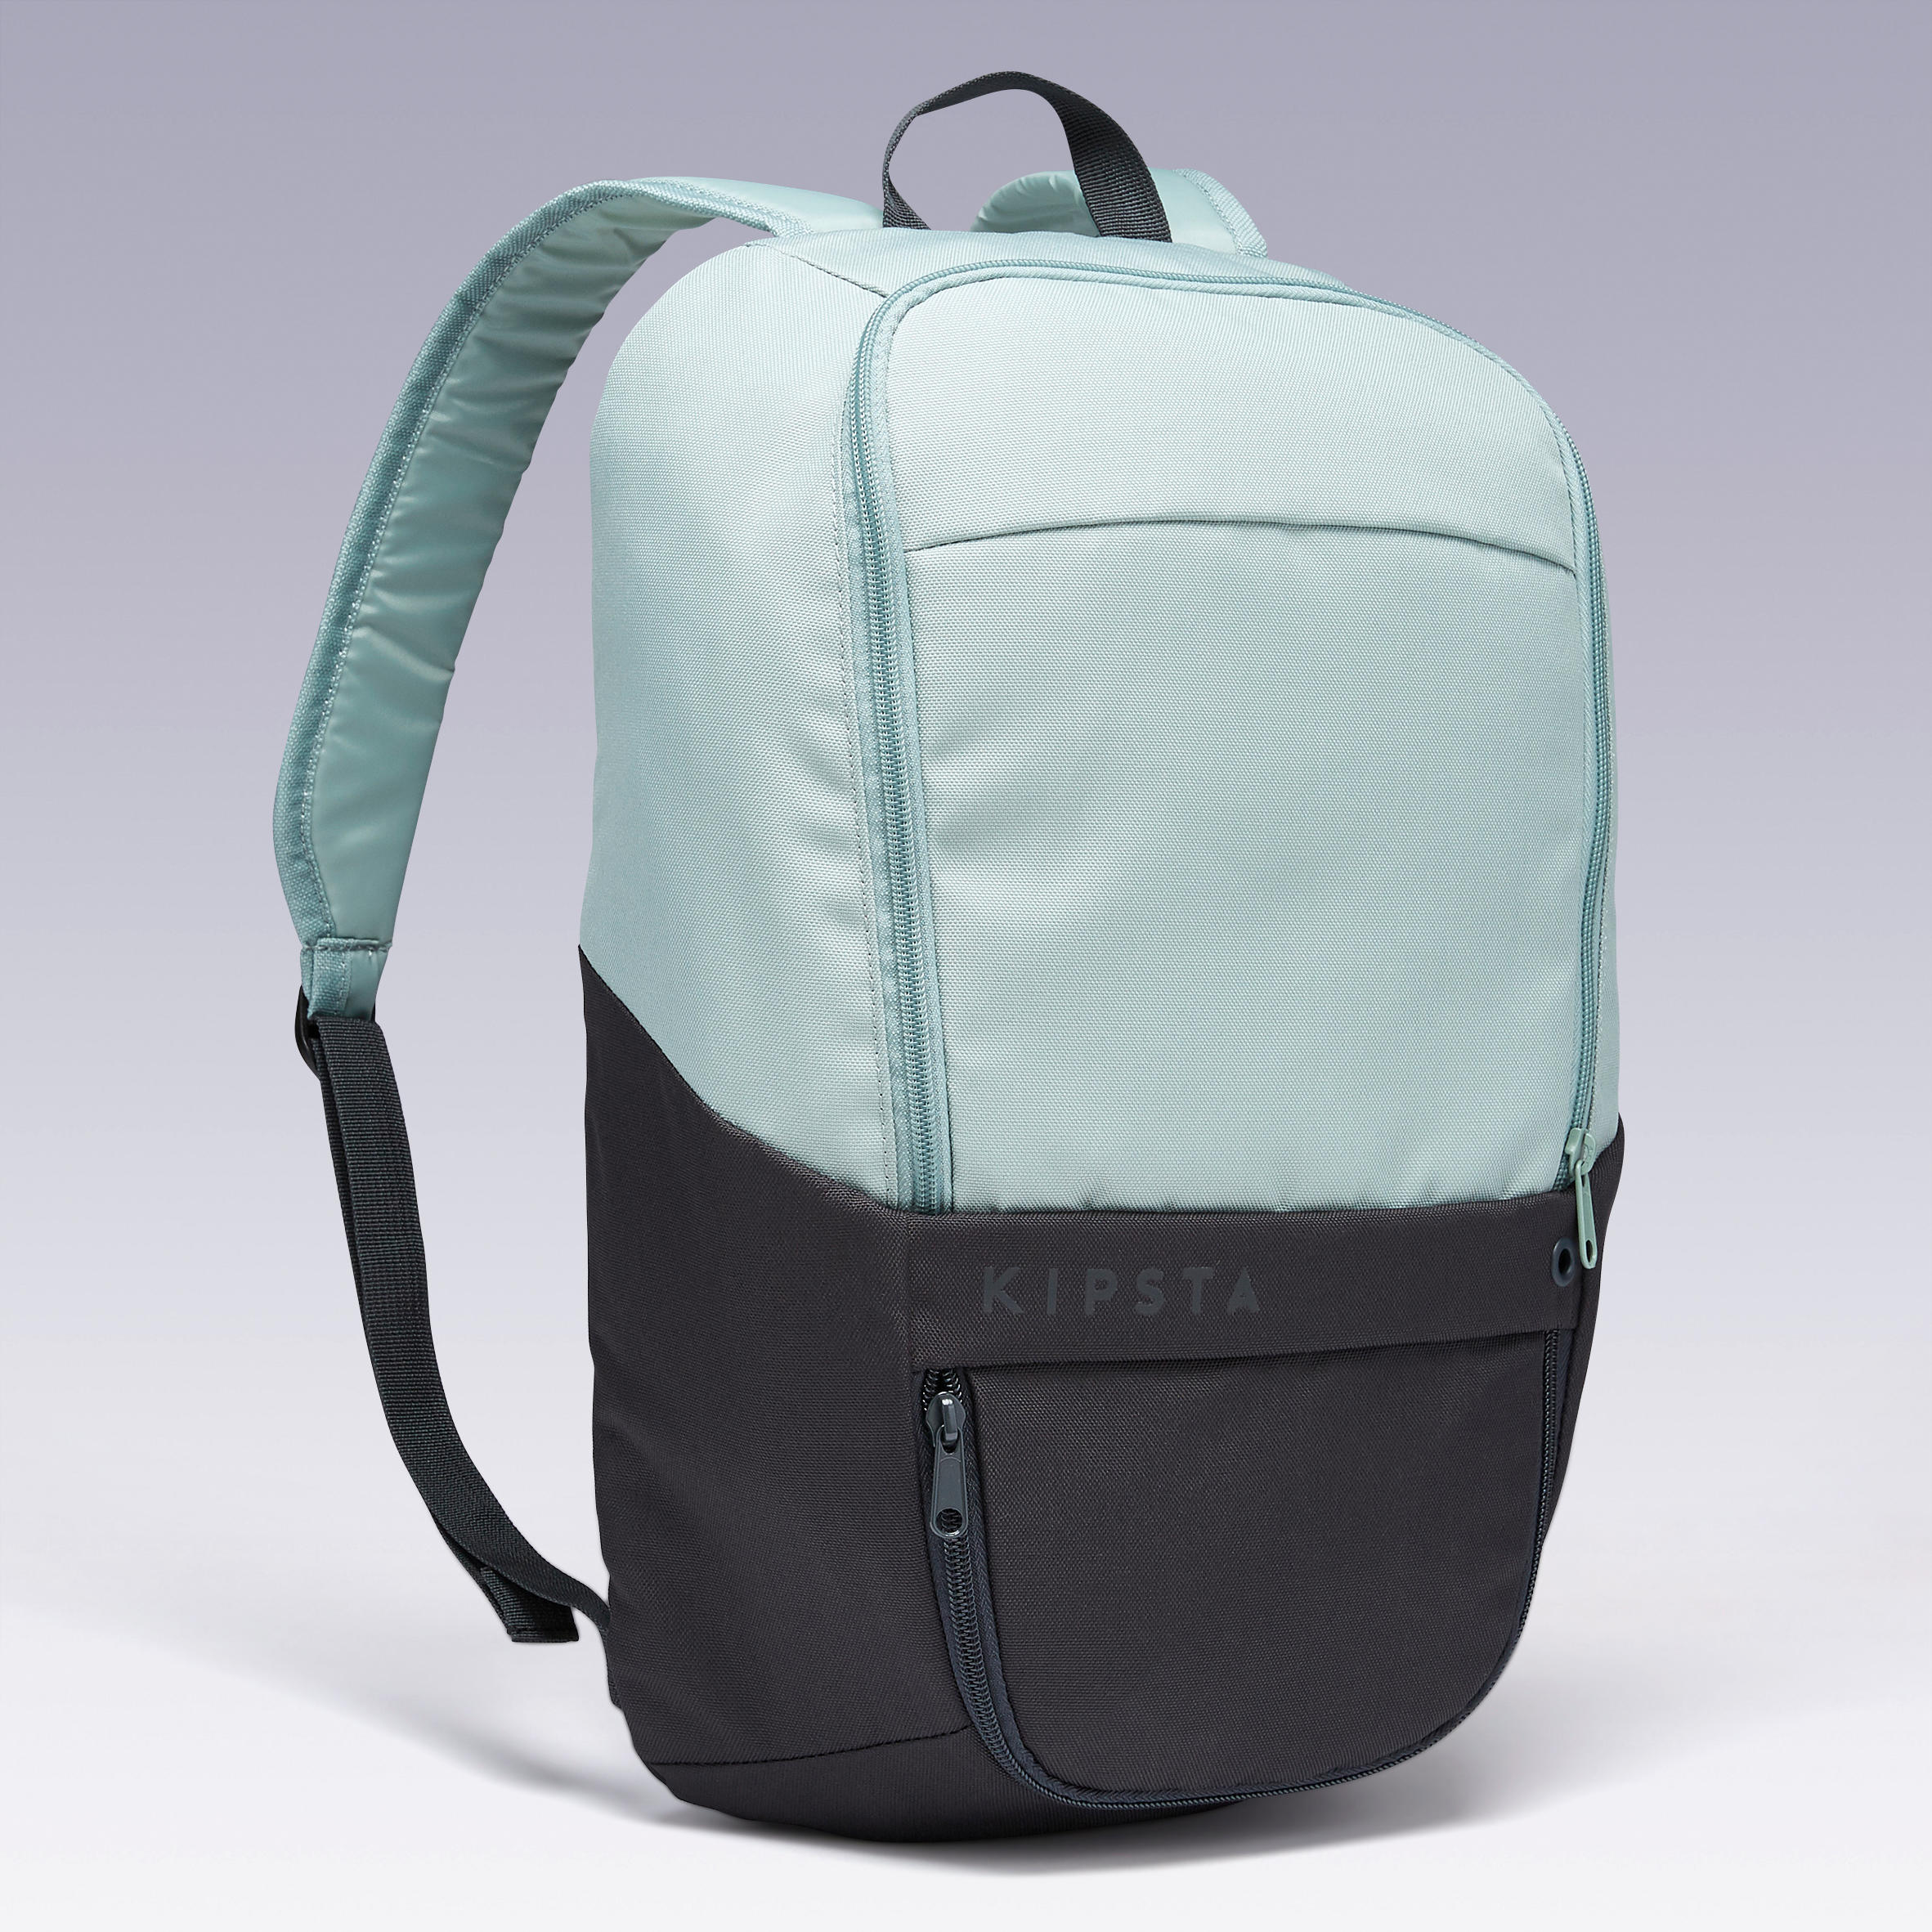 Forclaz Trek 100 Backpack Review - Mountain Weekly News